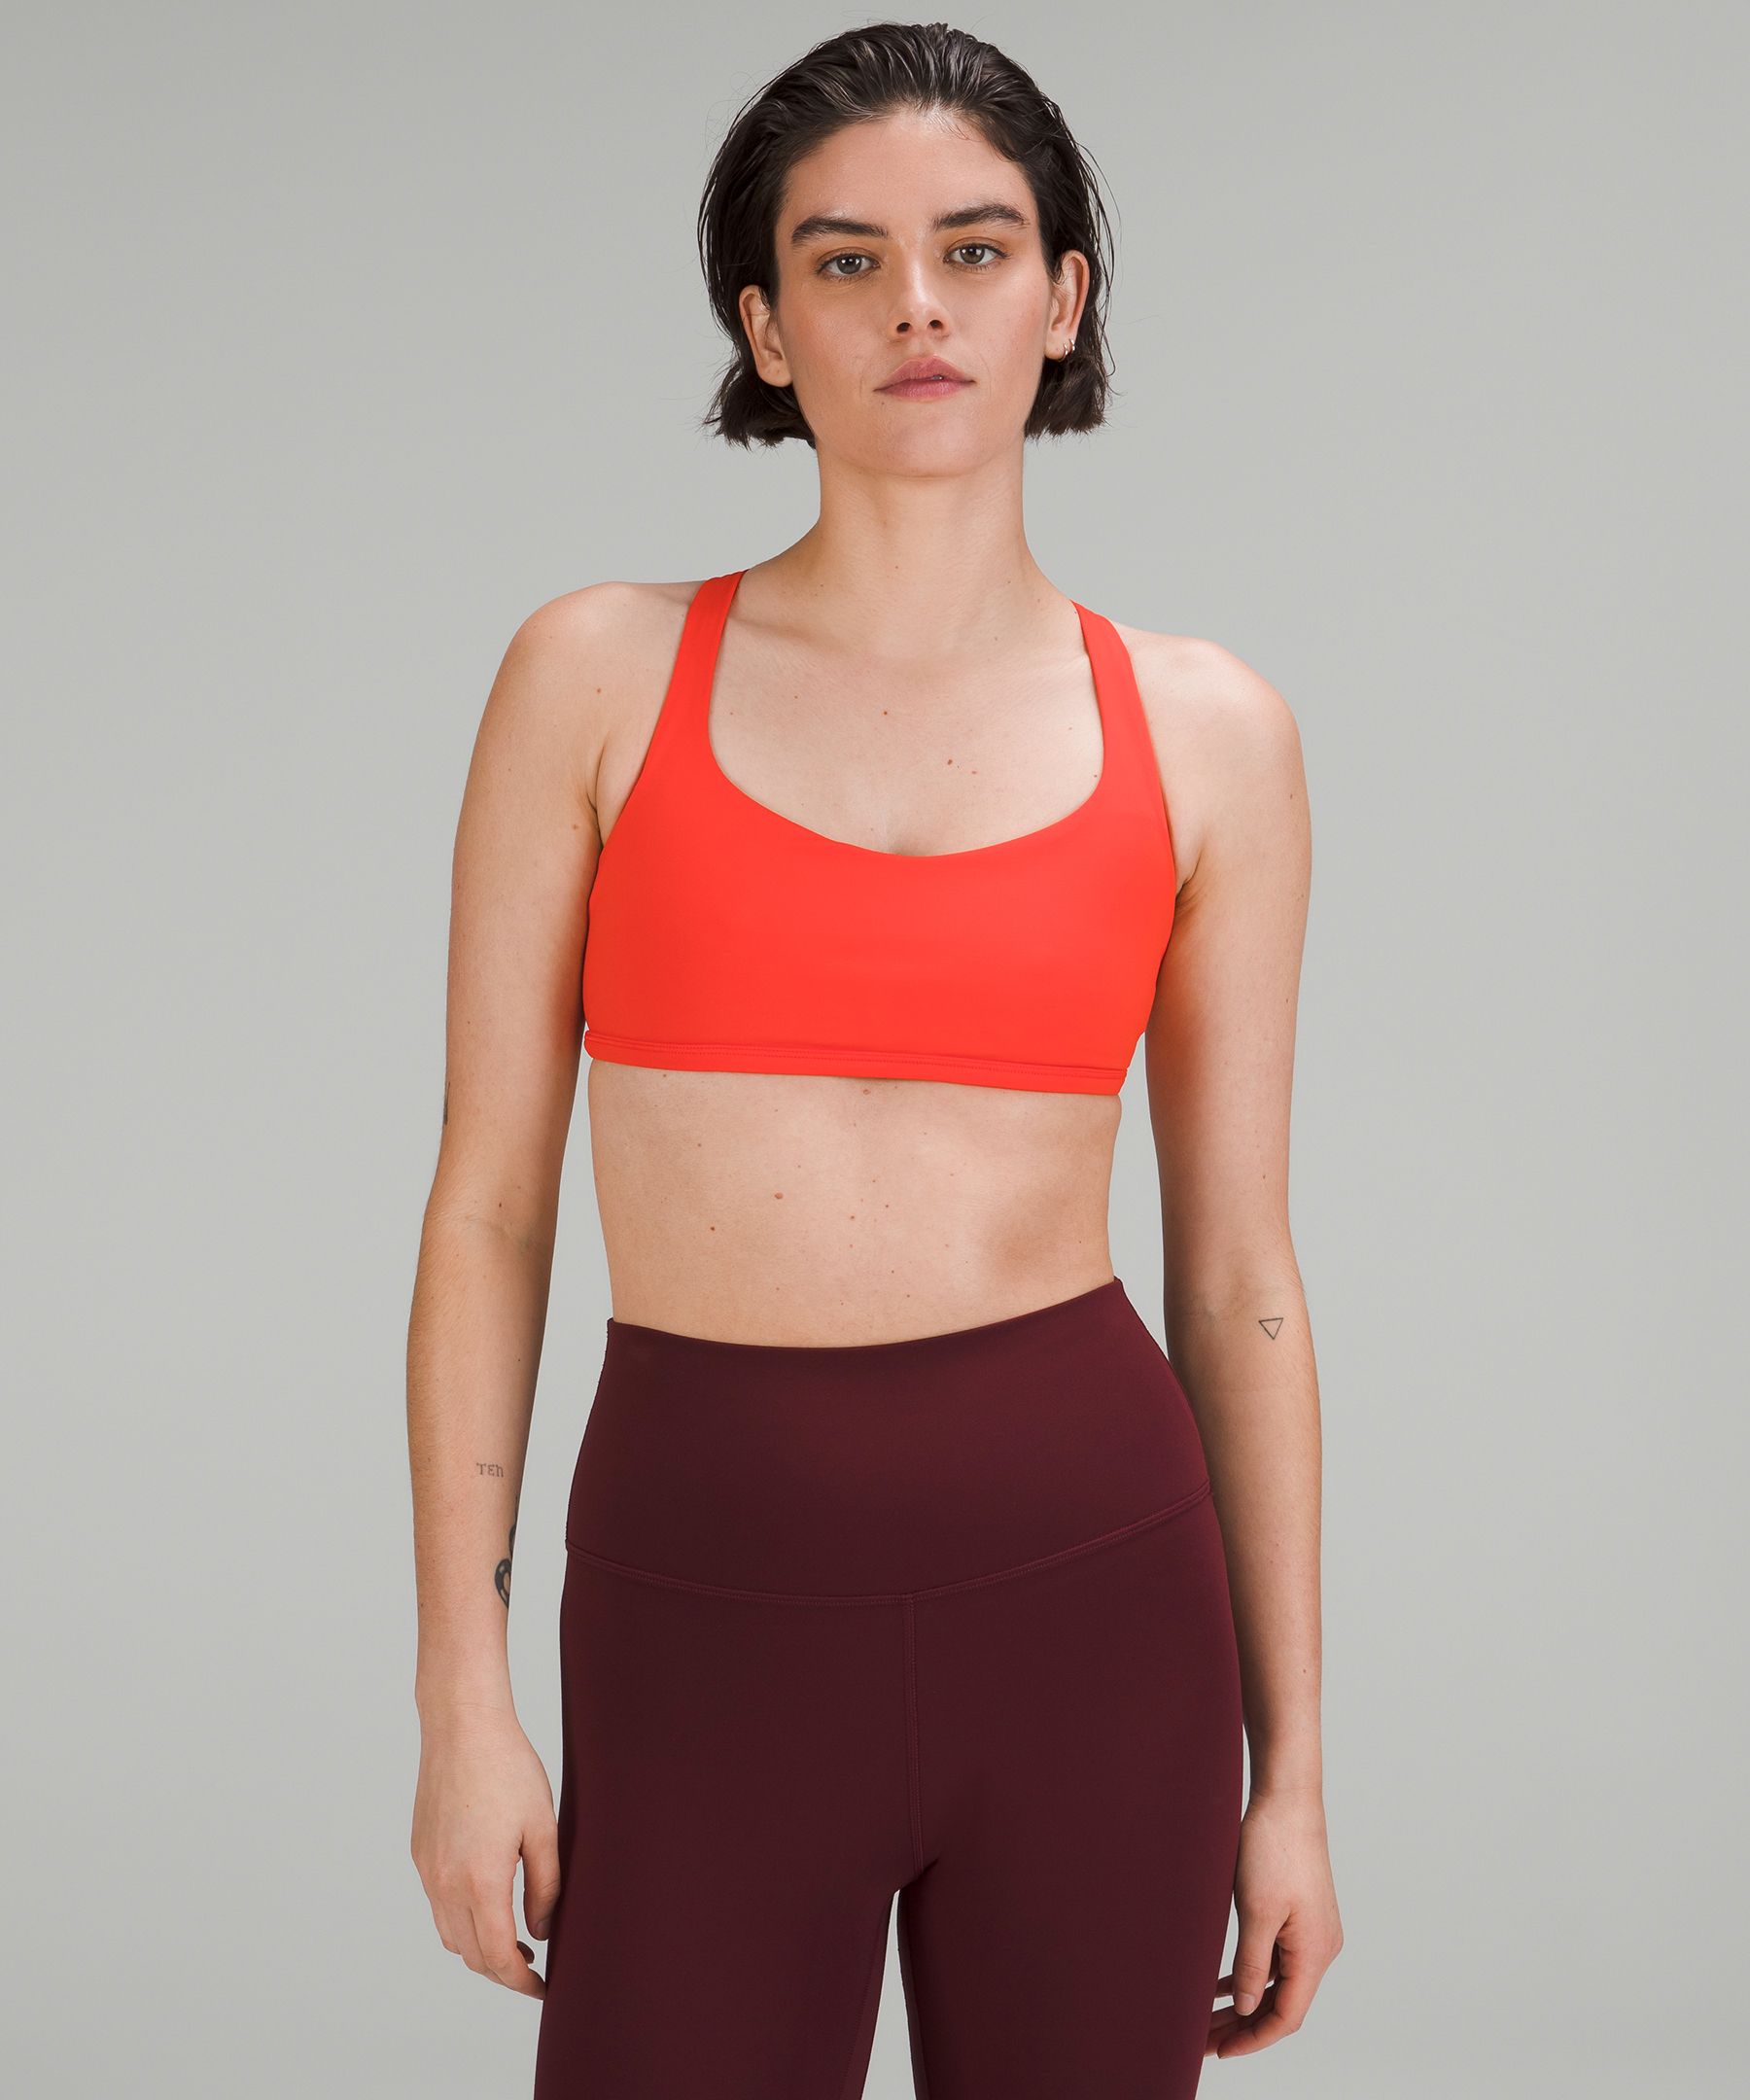 Lululemon Free To Be Bra - Wild Light Support, A/b Cup In Sonic